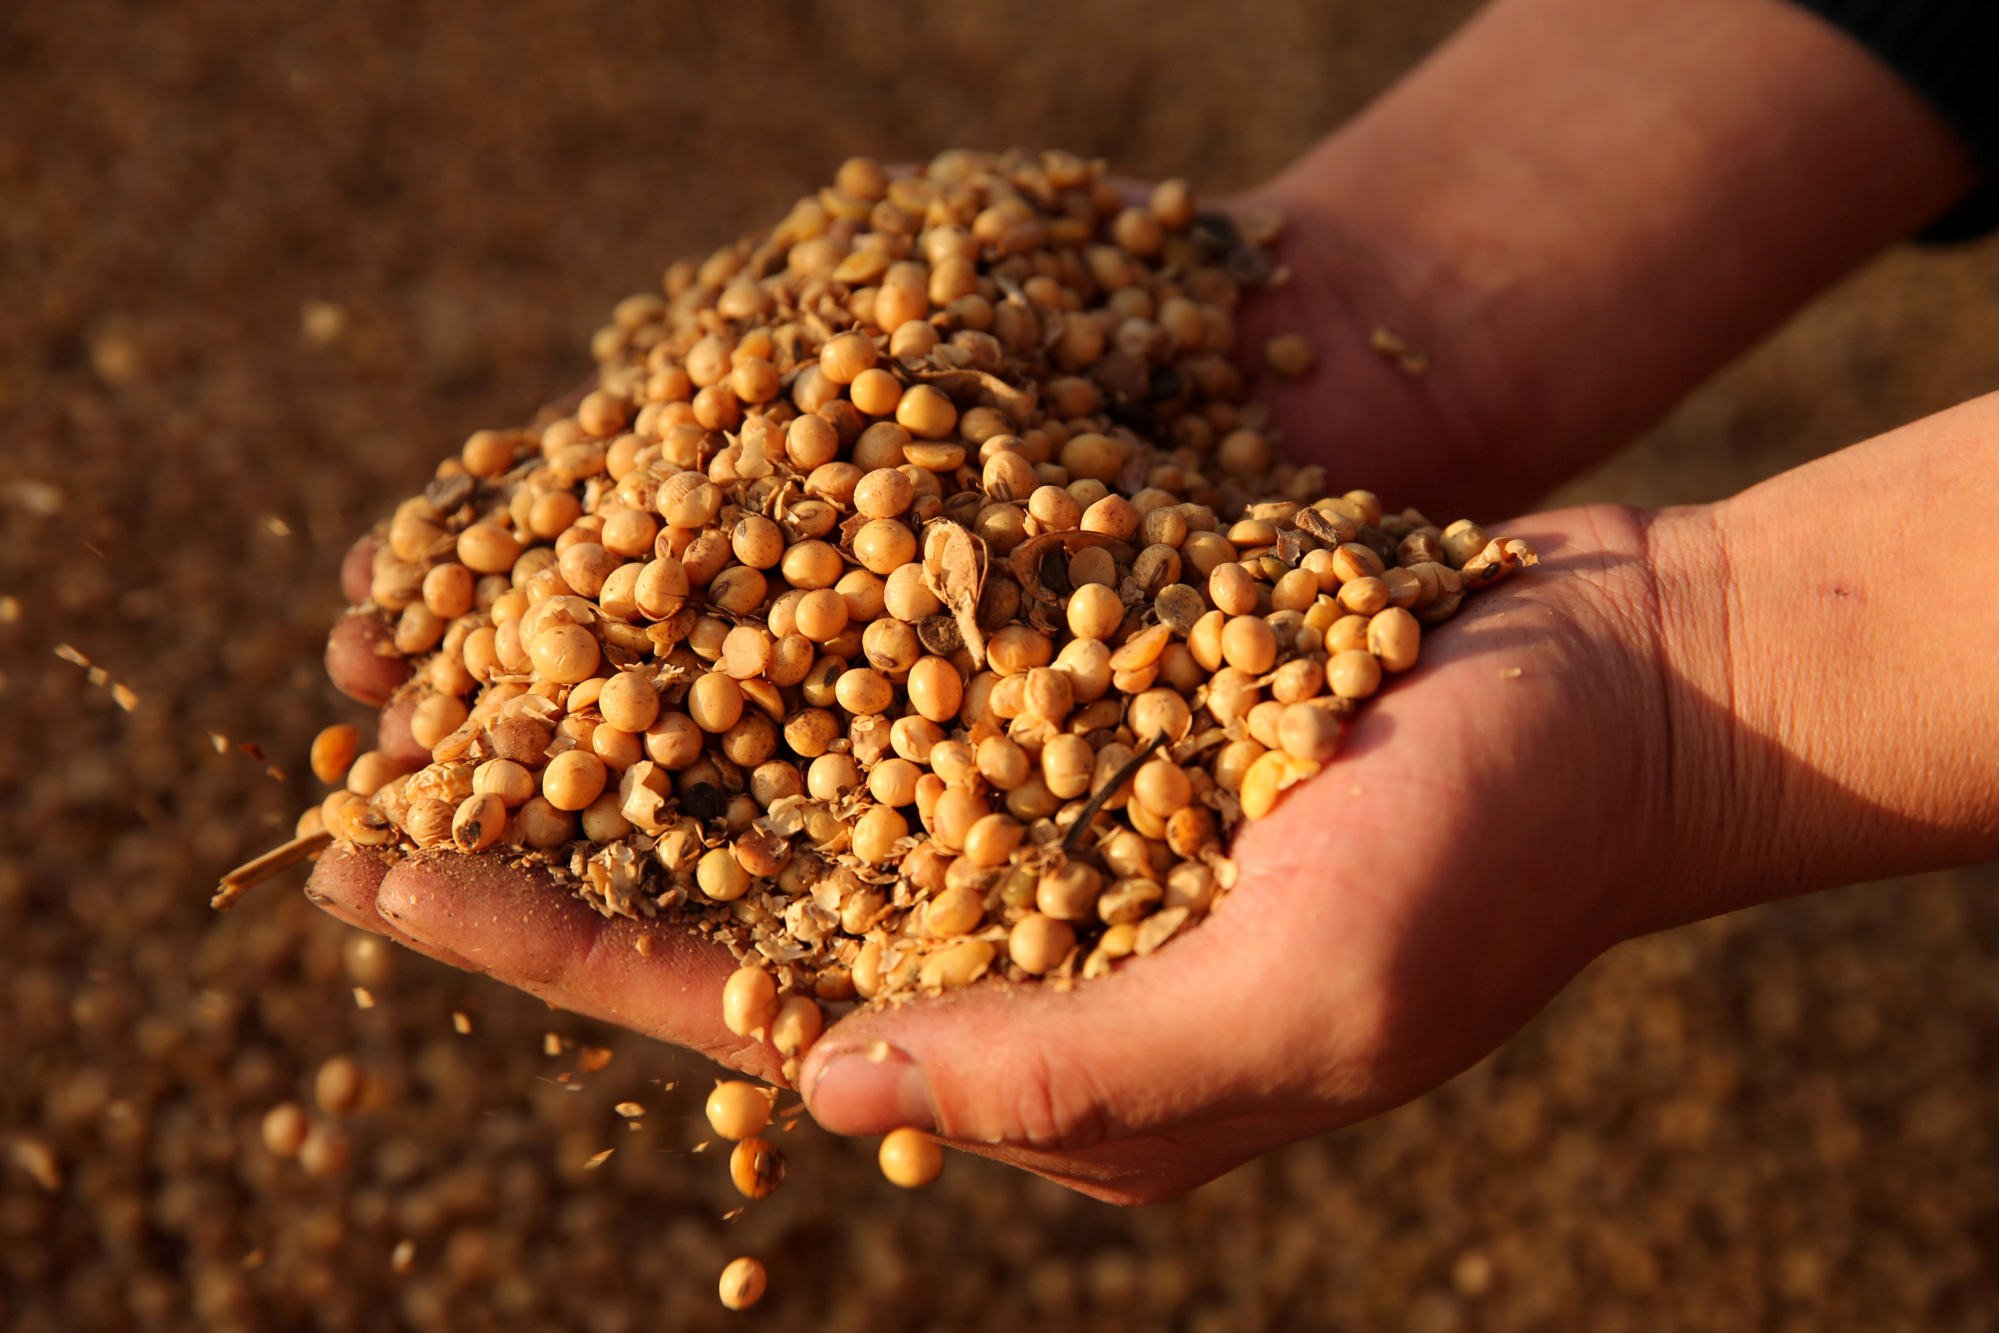 China imports more soybean than any other country. Photo: Reuters